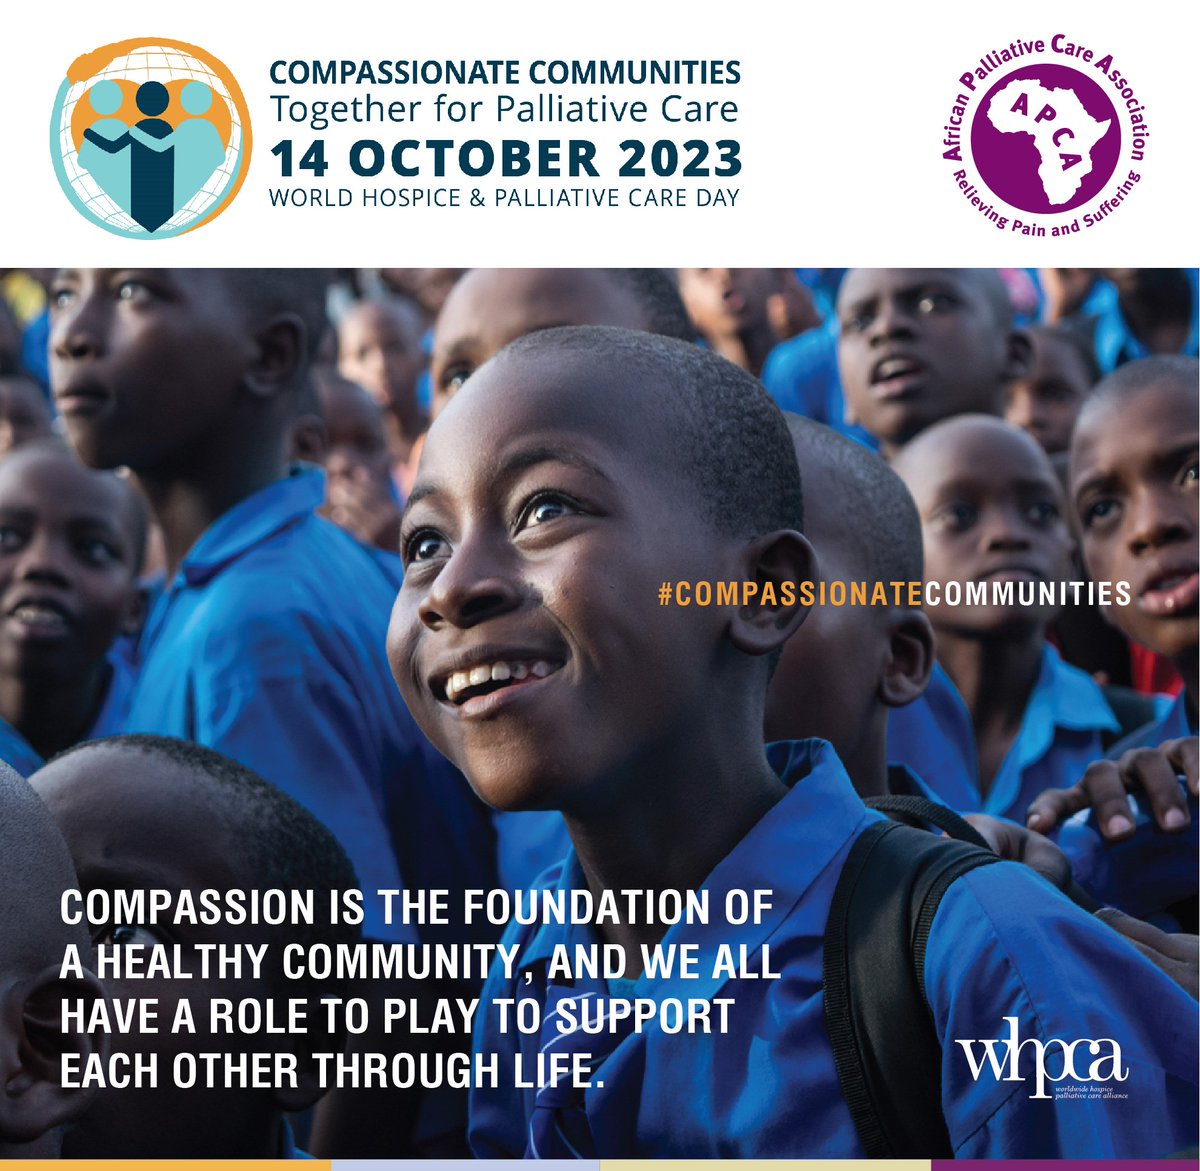 @APCAssociation mission is to reduce health-related pain & suffering by ensuring that #PalliativeCare is widely understood, integrated into health systems across the continent & underpinned by evidence #WorldHospiceandPalliativeCareDay #WHPCDay23 #compassionatecommunities @whpca